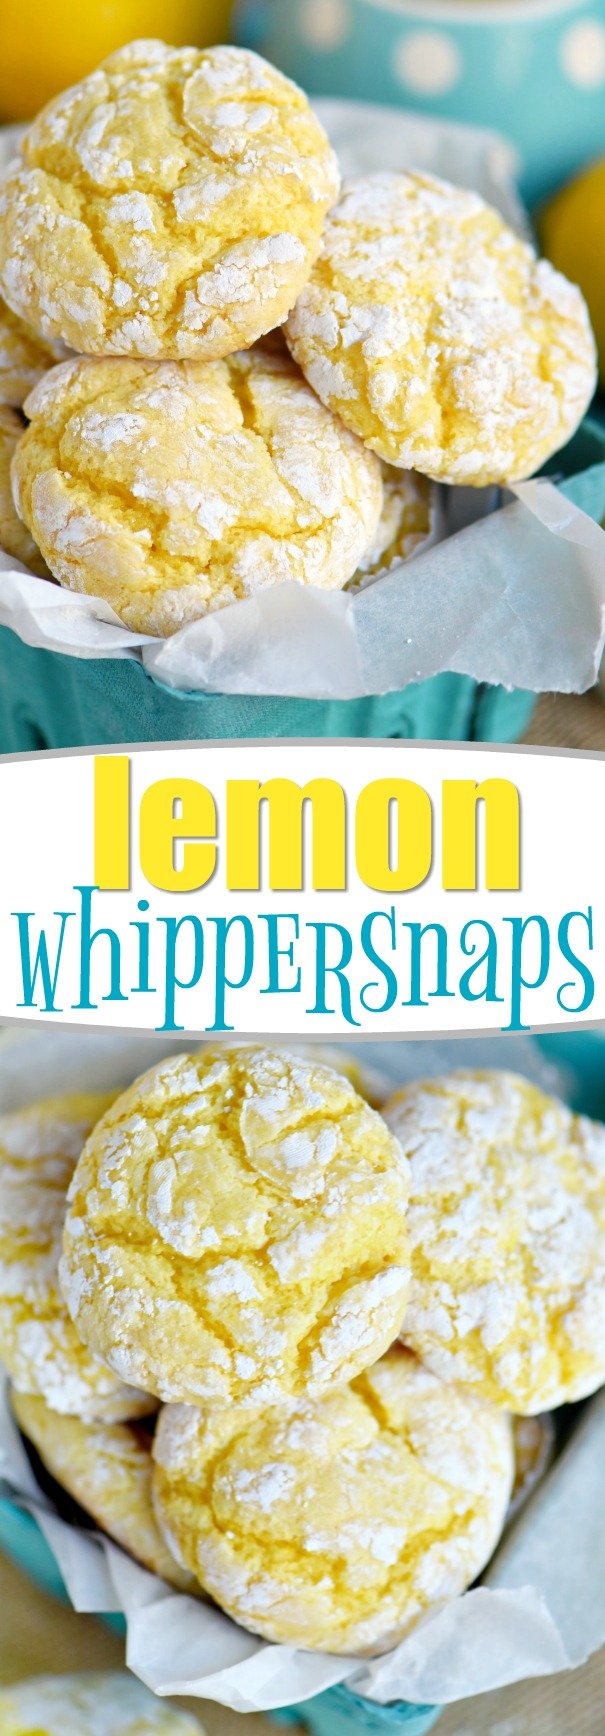 lemon-whippersnaps-cookies-collage